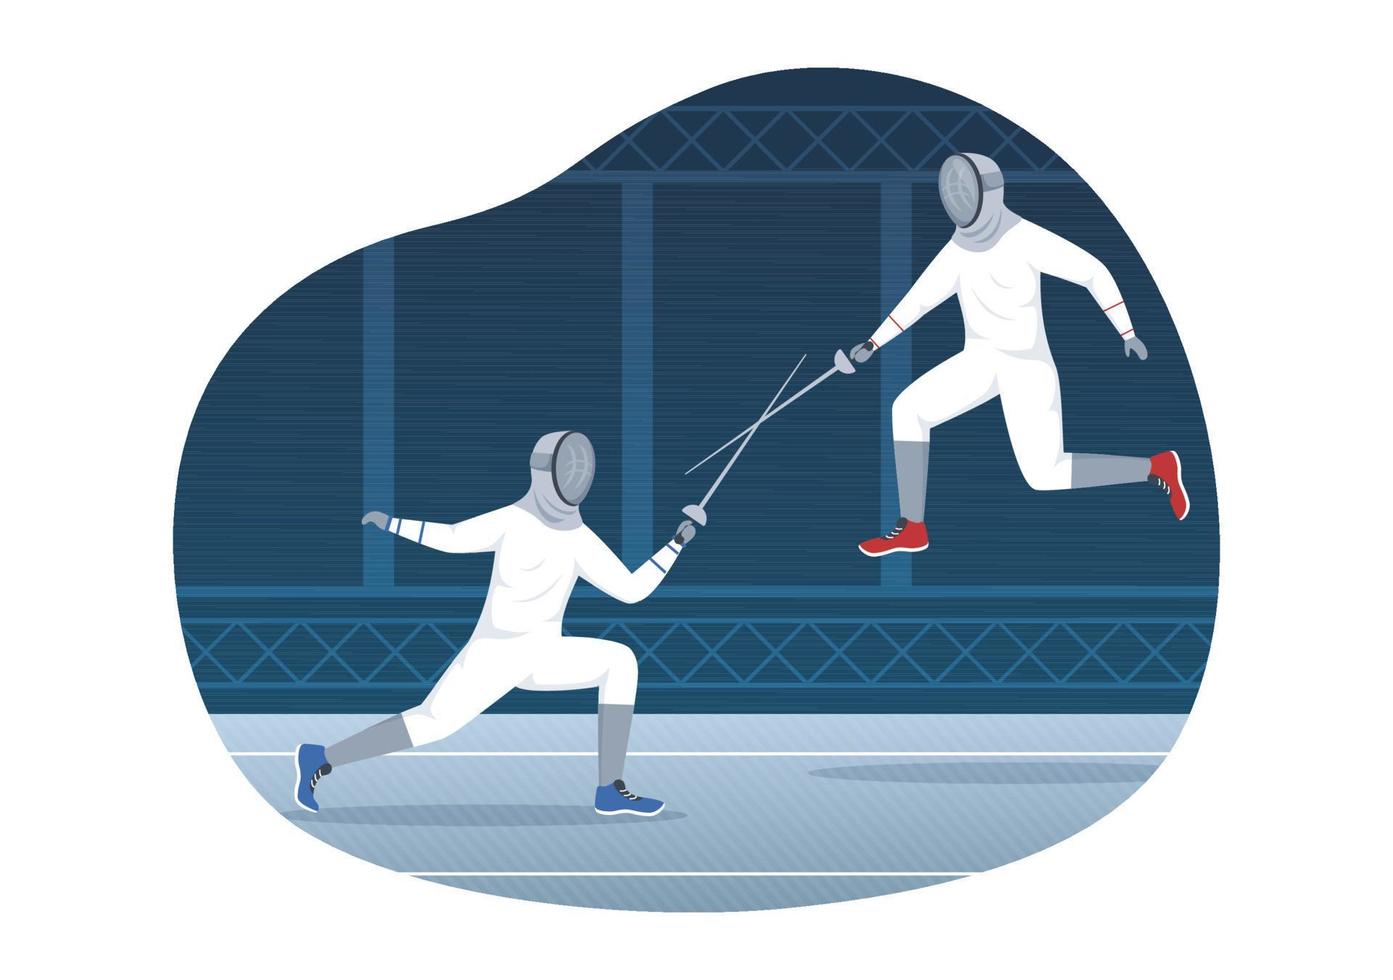 Fencing Player Sport Illustration with Fencer Fighting on Piste and Sword Duel Competition Event in Flat Cartoon Hand Drawn Templates vector